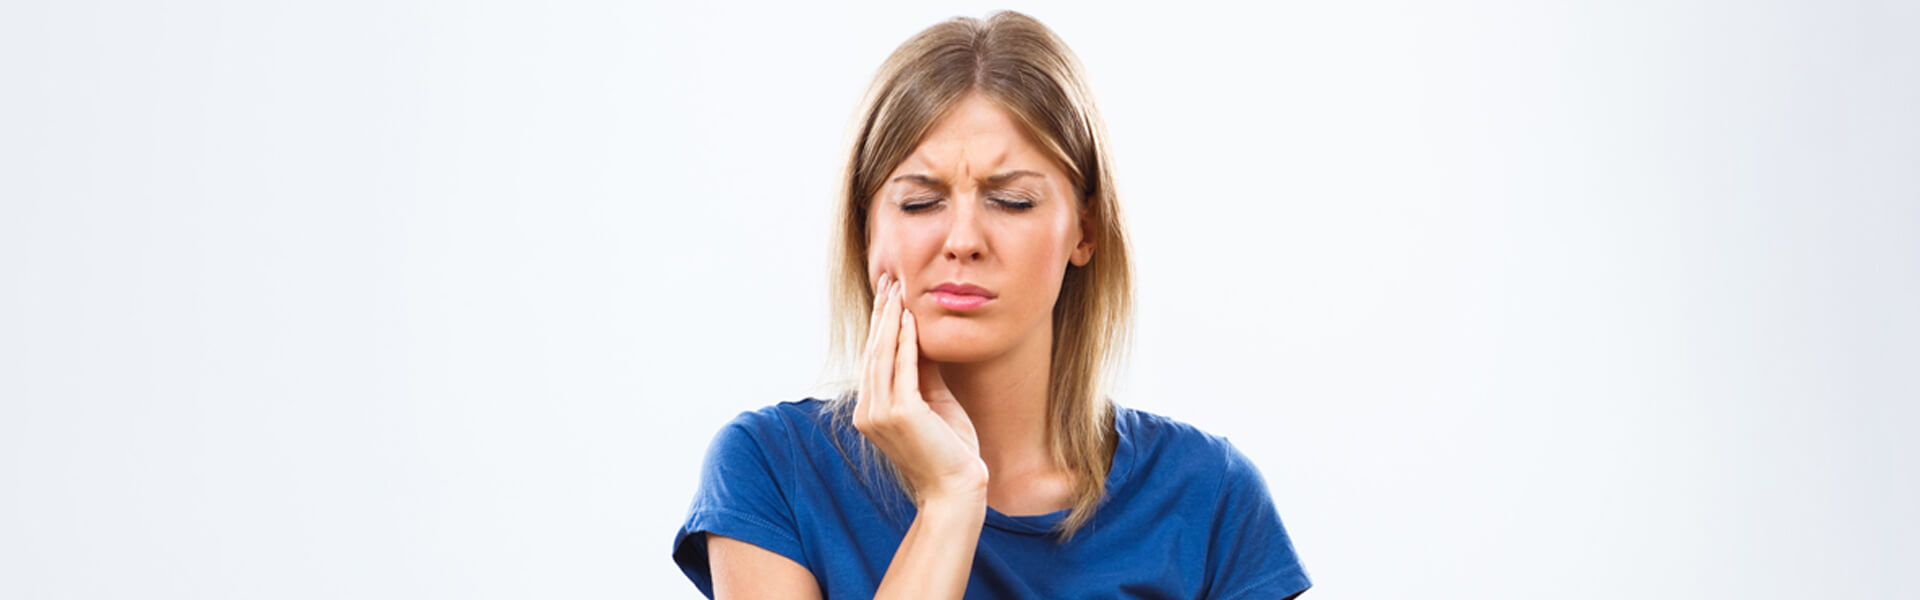 Common Dental Problems That Are Treated in Emergency Dentistry